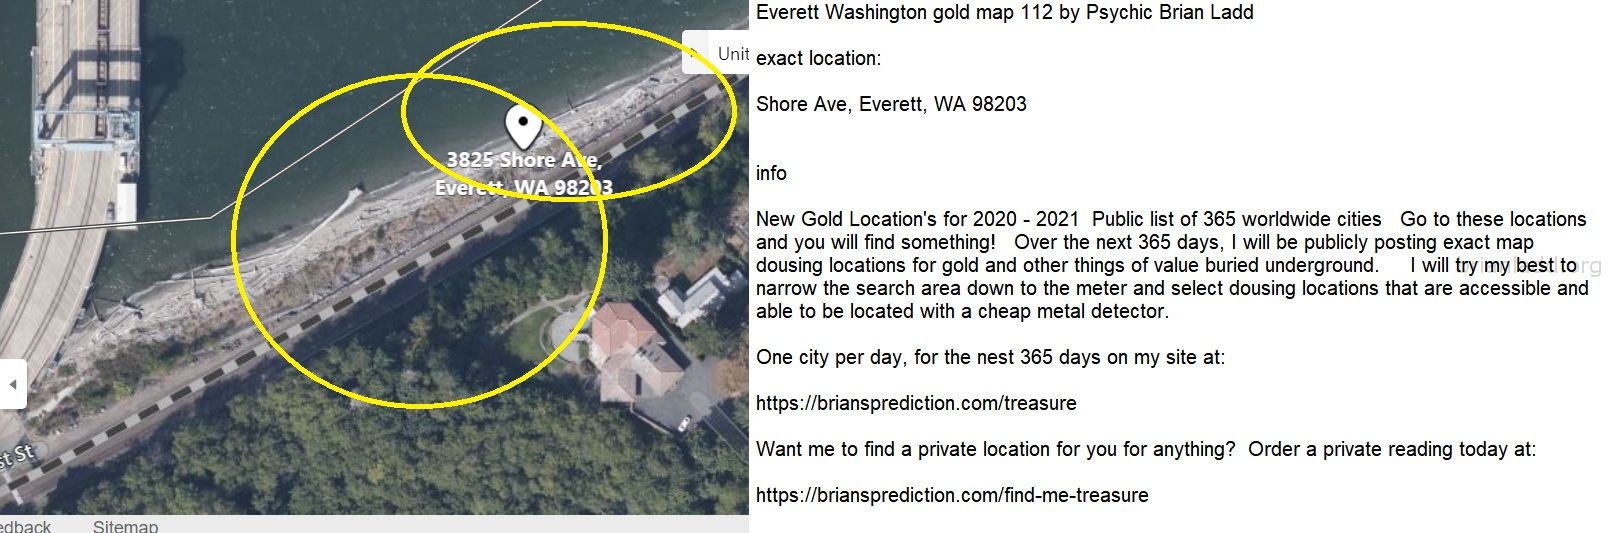 Everett Washington Gold Map 112 By Psychic Brian Ladd - Everett Washington Gold Map 112 By Psychic Brian Ladd  Exact Loc...
Everett Washington Gold Map 112 By Psychic Brian Ladd  Exact Location:  Shore Ave, Everett, Wa 98203  Info  New Gold Location'S For 2020 - 2021  Public List Of 365 Worldwide Cities  Go To These Locations And You Will Find Something!  Over The Next 365 Days, I Will Be Publicly Posting Exact Map Dousing Locations For Gold And Other Things Of Value Buried Underground.  I Will Try My Best To Narrow The Search Area Down To The Meter And Select Dousing Locations That Are Accessible And Able To Be Located With A Cheap Metal Detector.  One City Per Day, For The Nest 365 Days On My Site At:   https://briansprediction.com/Treasure  Want Me To Find A Private Location For You For Anything?  Order A Private Reading Today At:   https://briansprediction.com/Find-Me-Treasure
